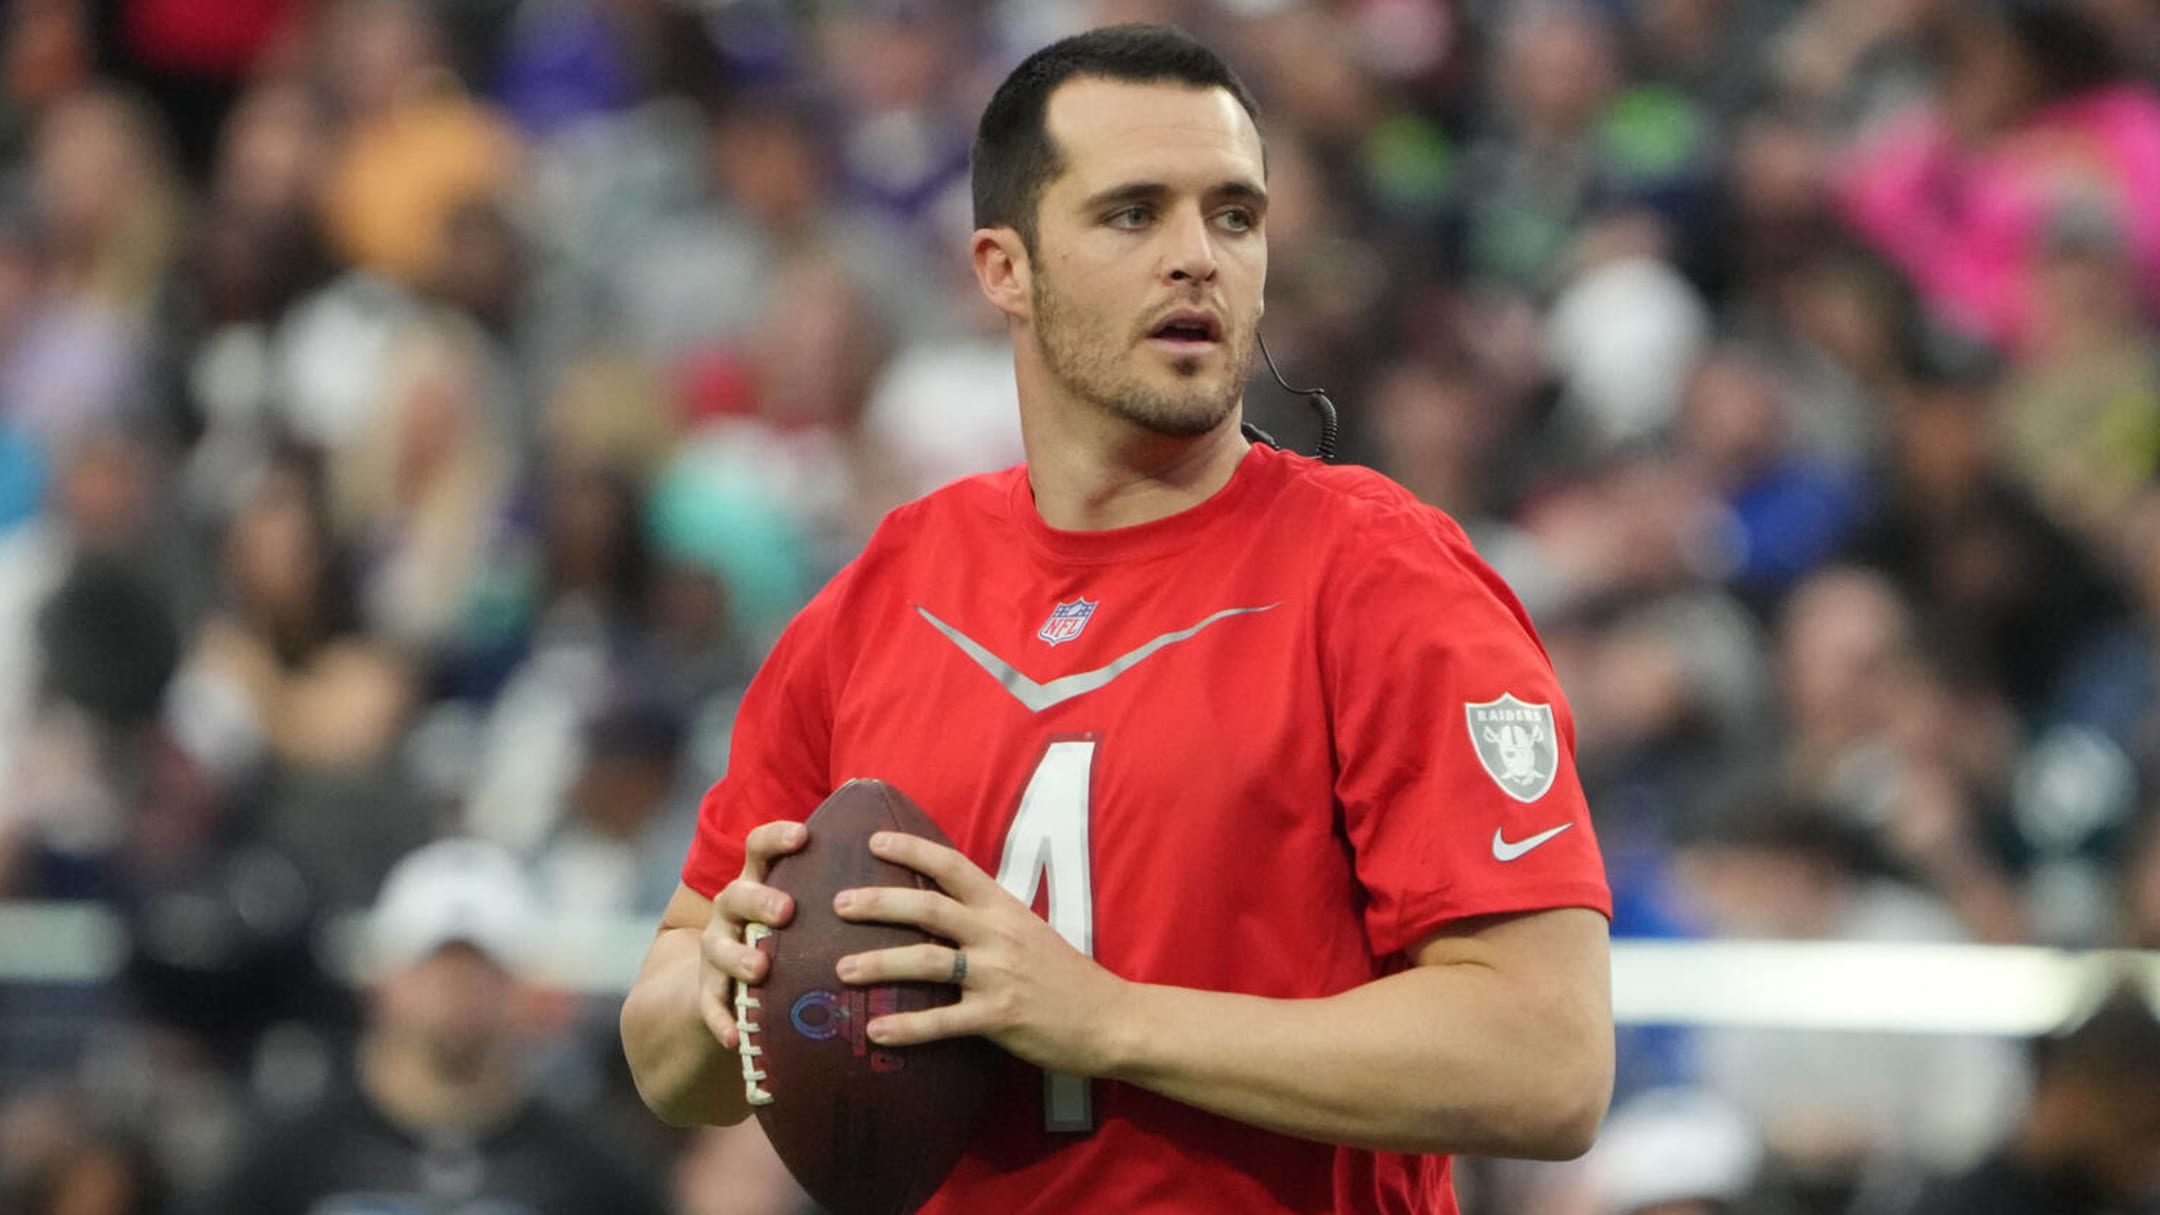 It's time for NY Jets to sign Derek Carr,' says ESPN reporter